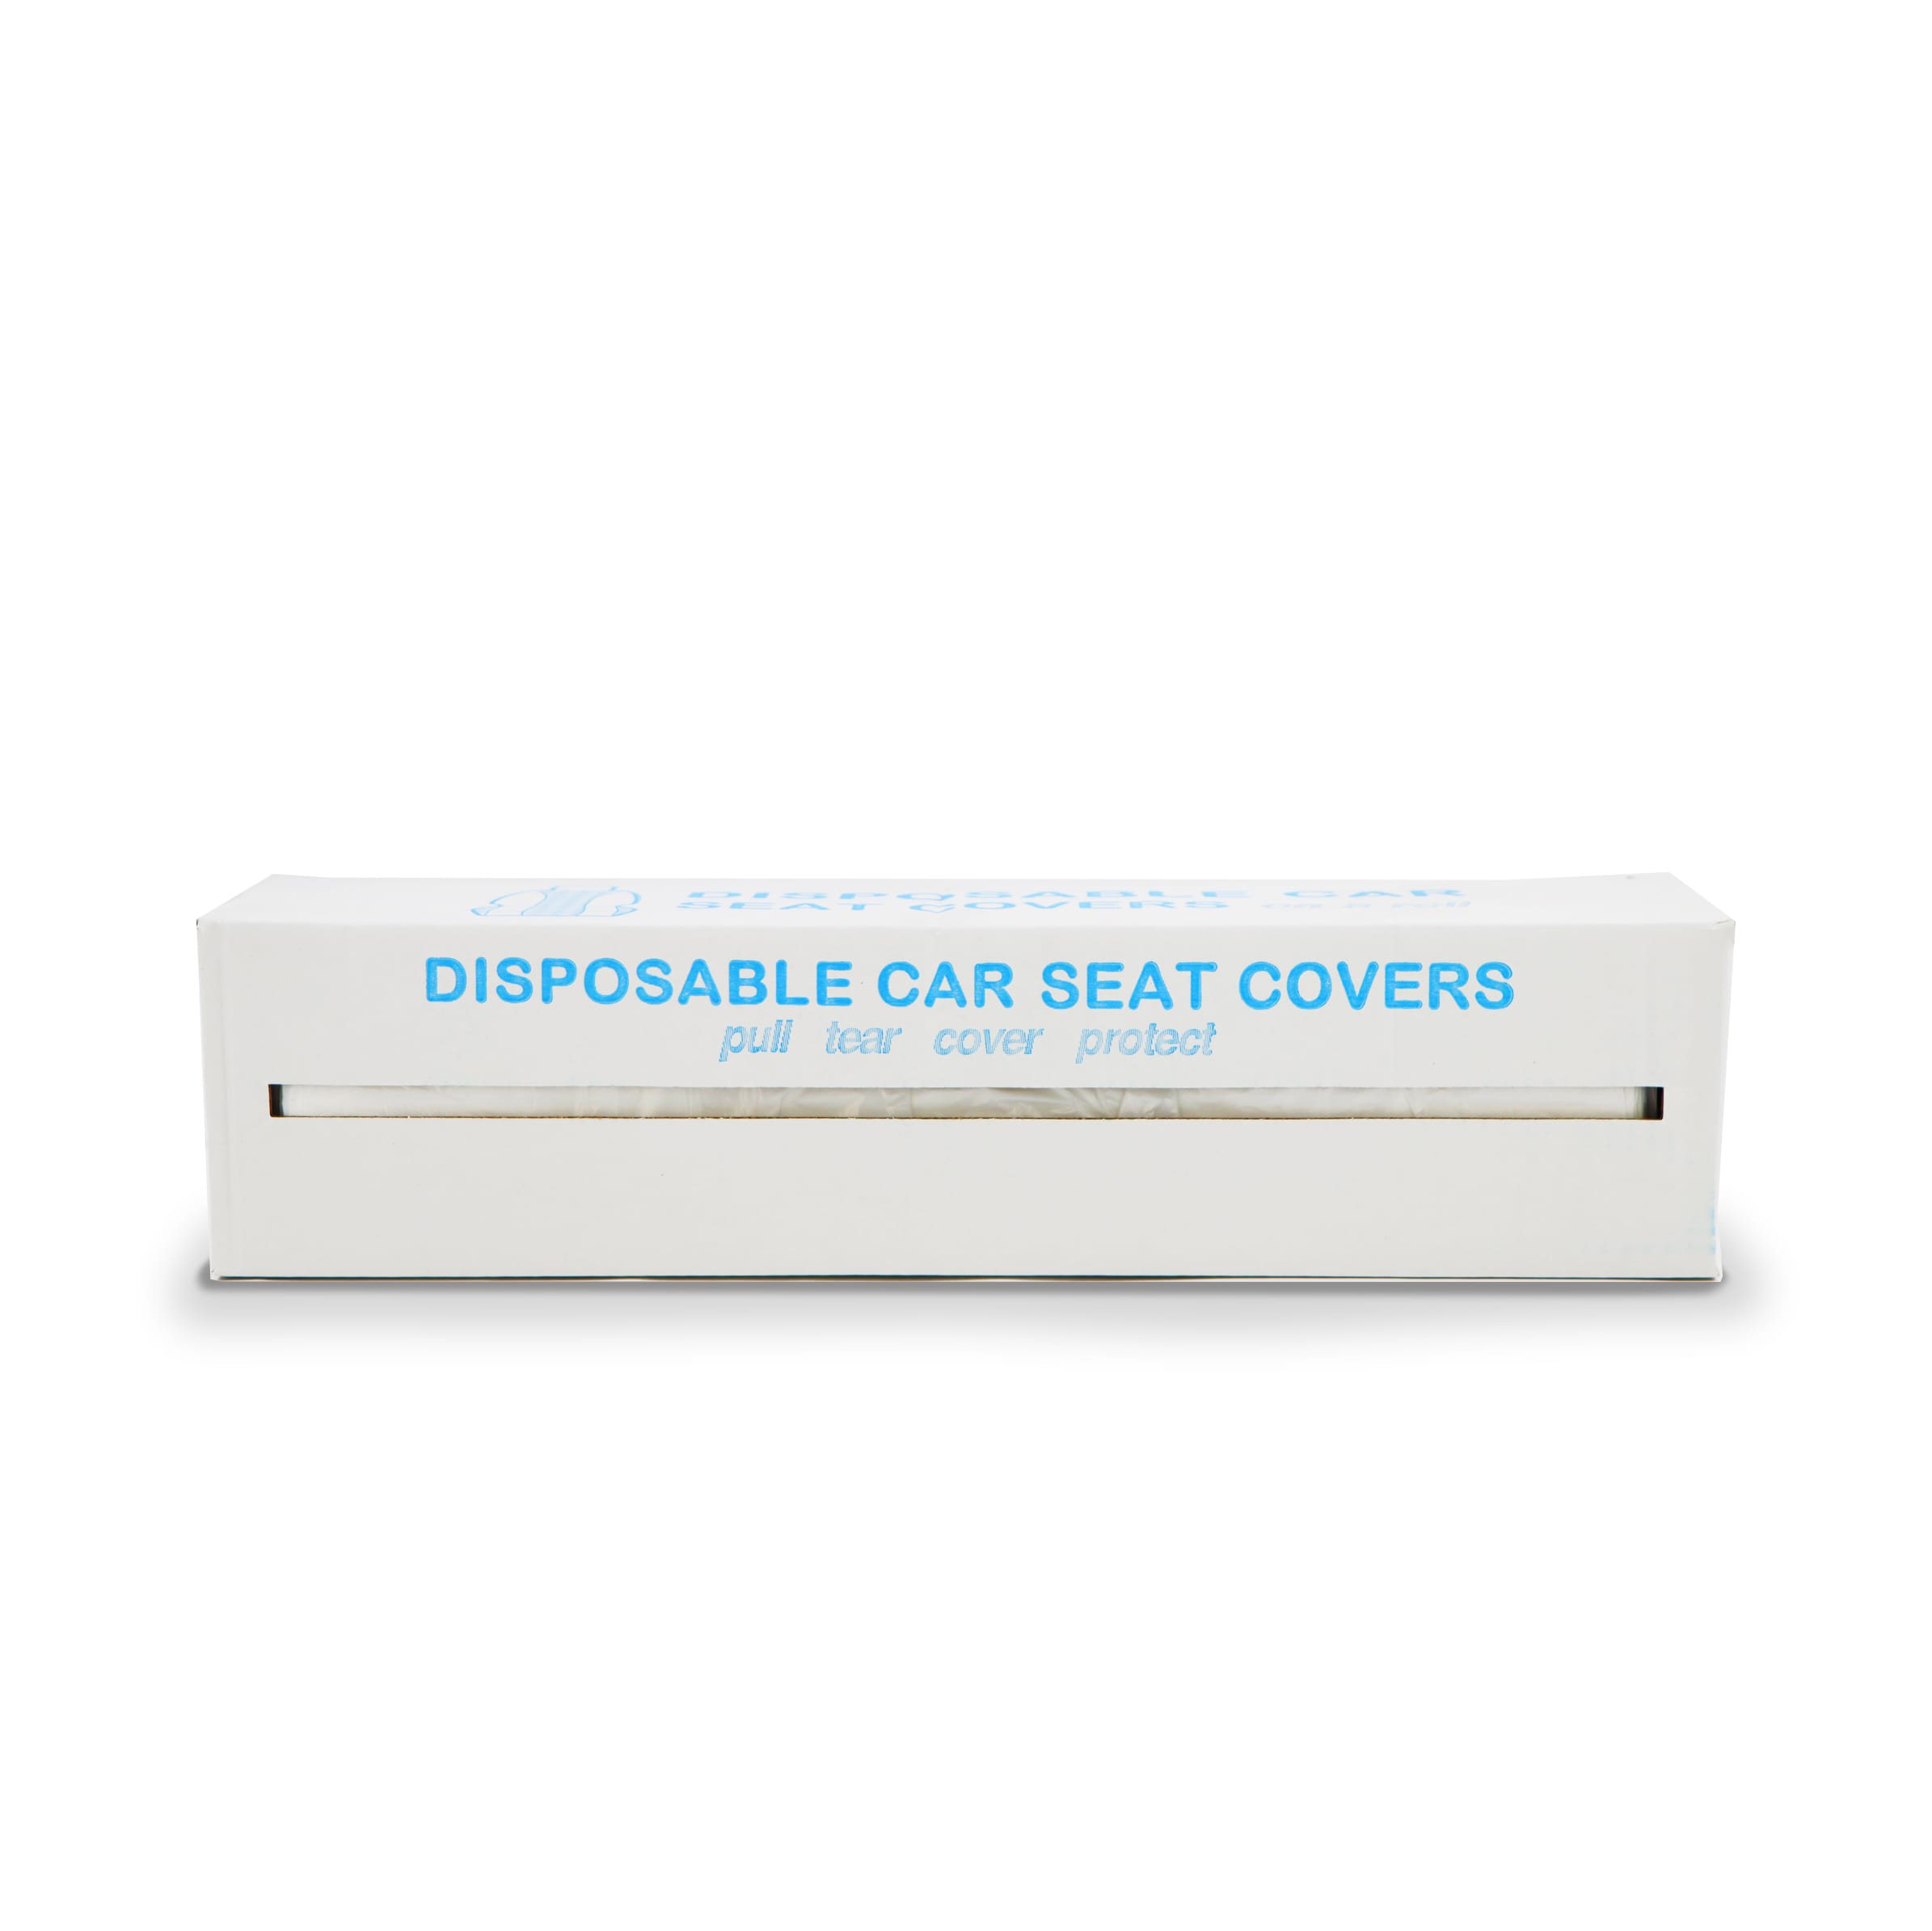 DISPOSABLE SEAT COVERS - Autobrite Direct